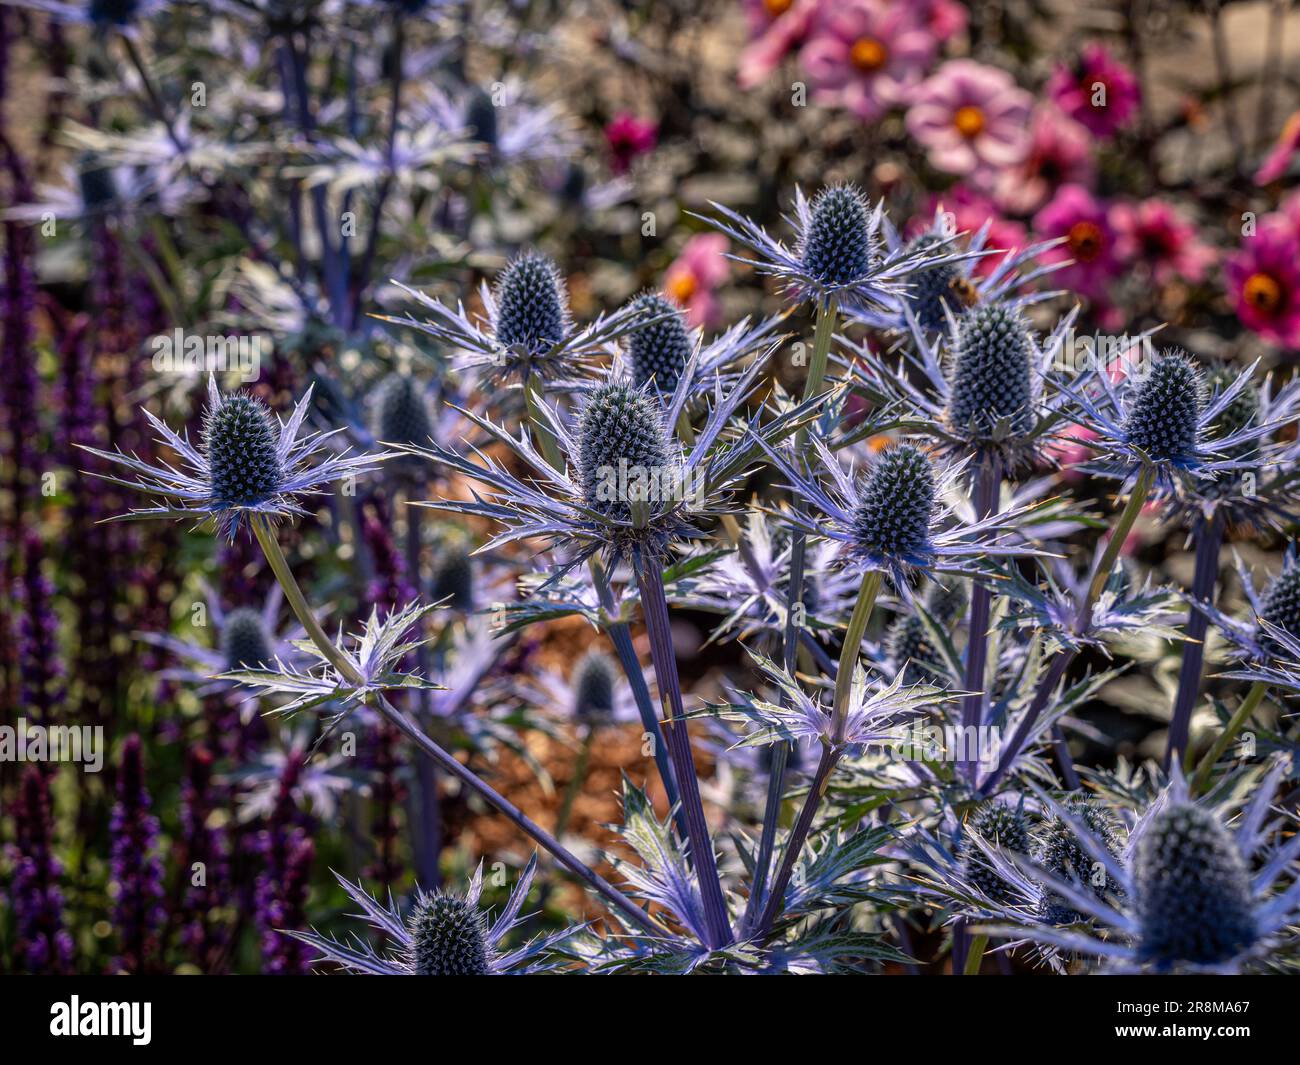 Close-up of the blue spiky flowers of Eryngium x zabelii 'Big Blue' growing in a UK garden Stock Photo